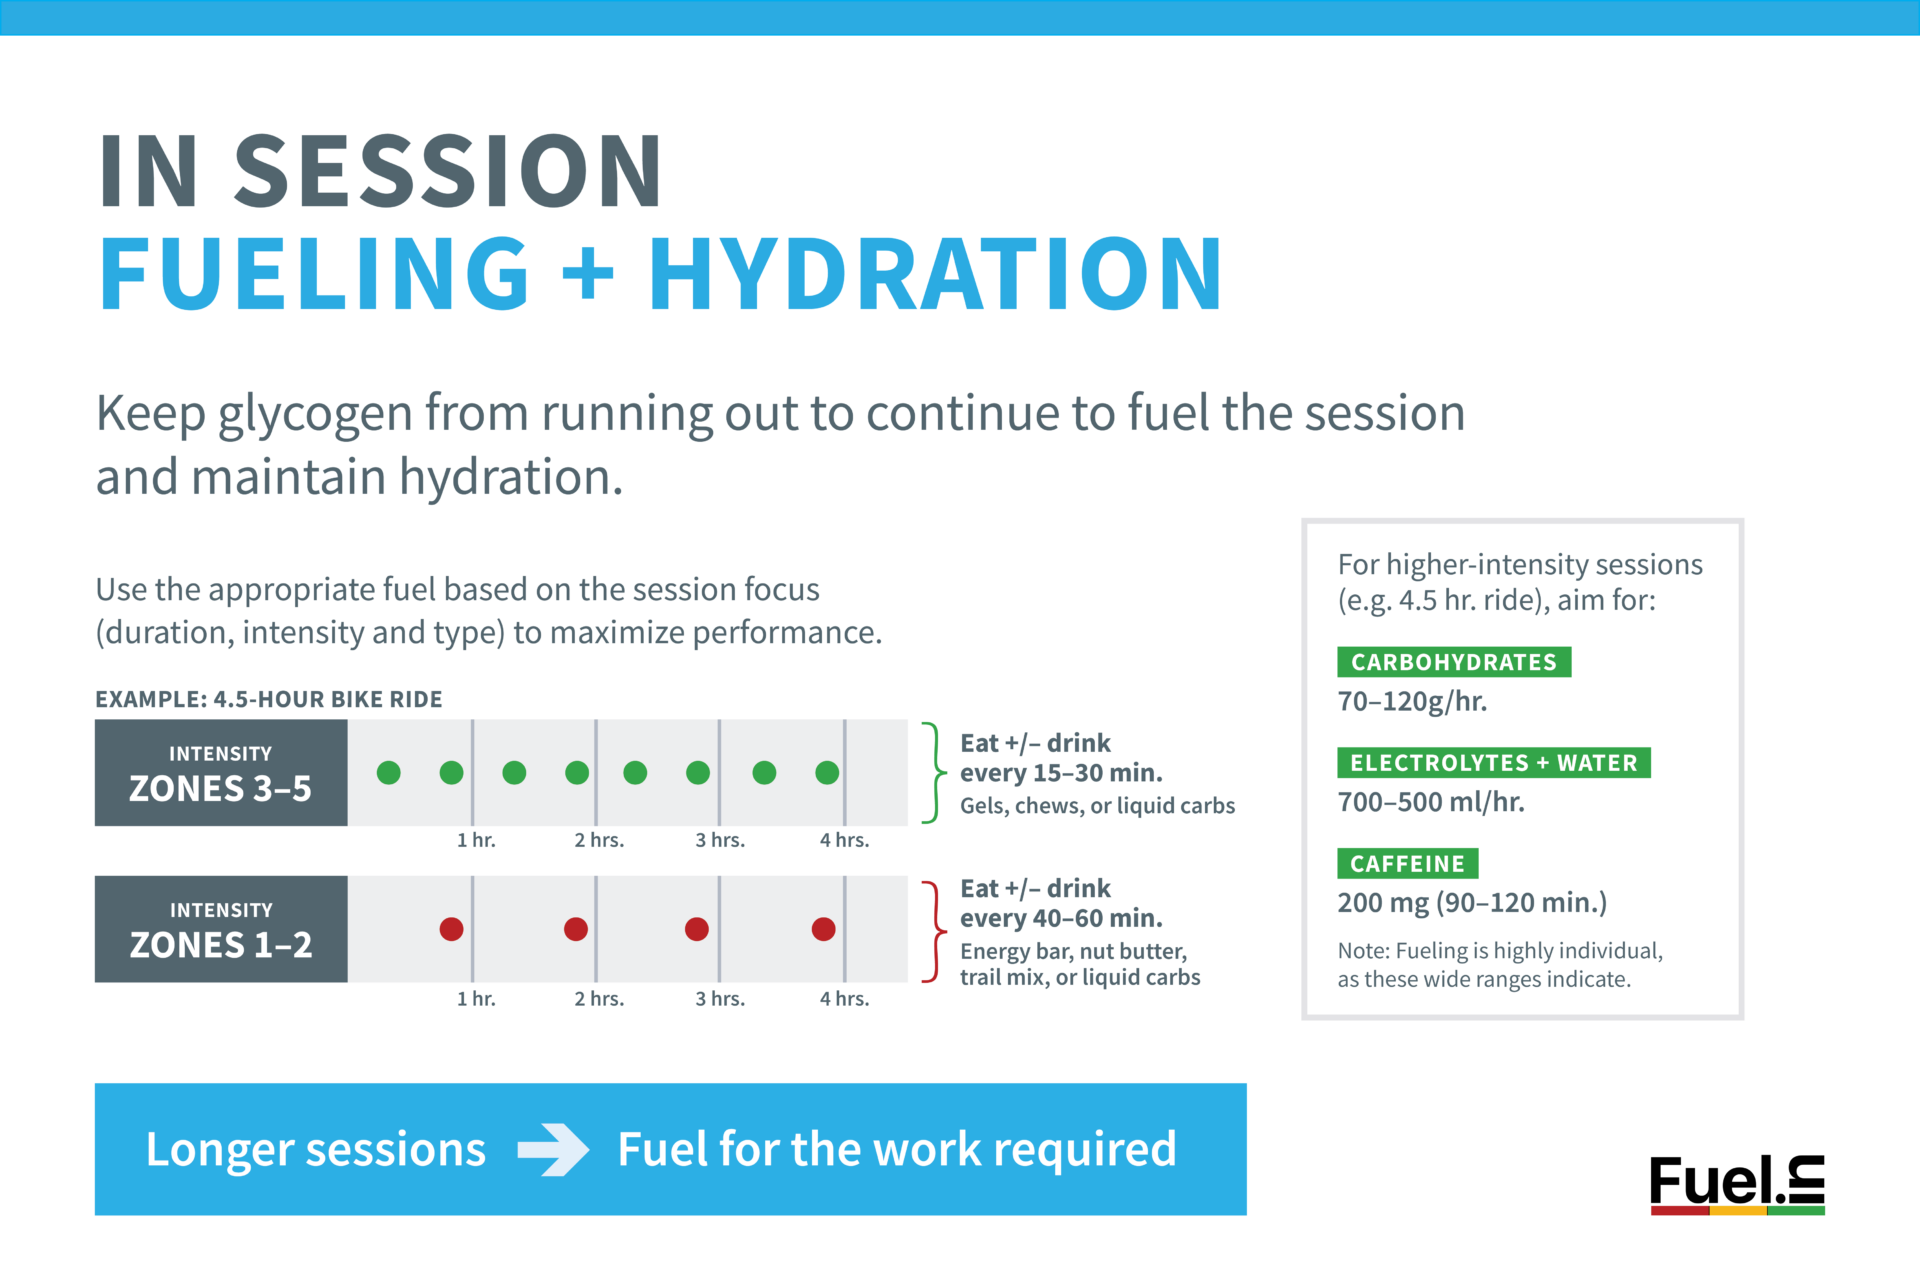 Example of in-session fueling and hydration plan from Fuelin